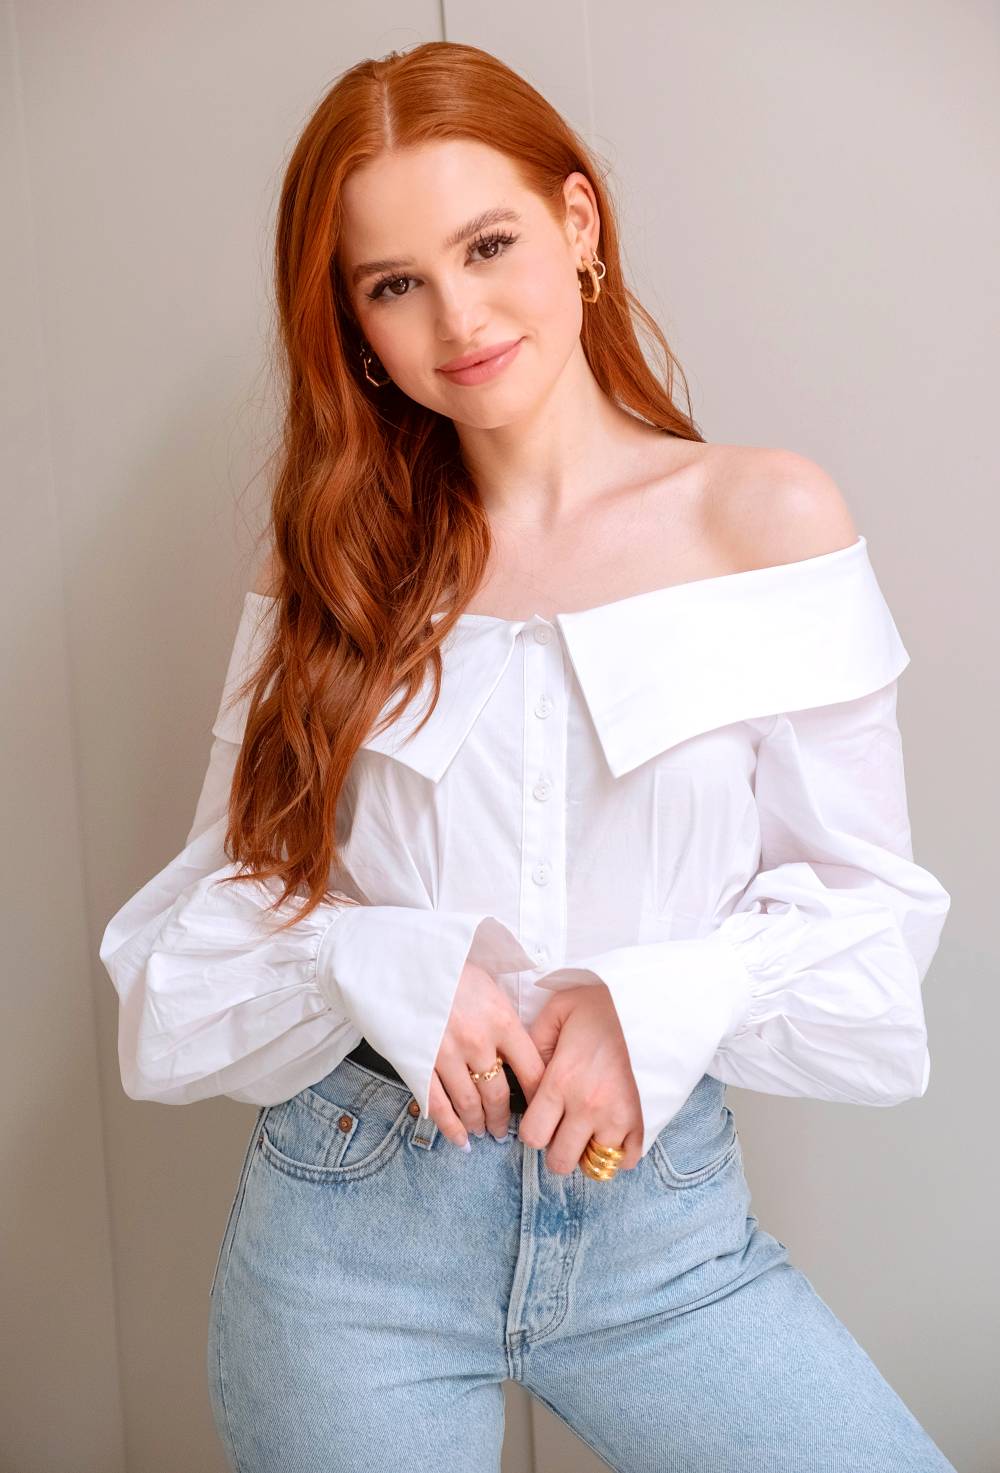 Madelaine Petsch Is Proud Badass Vanessa Morgan Speaking Out About Riverdale Diversity Issues